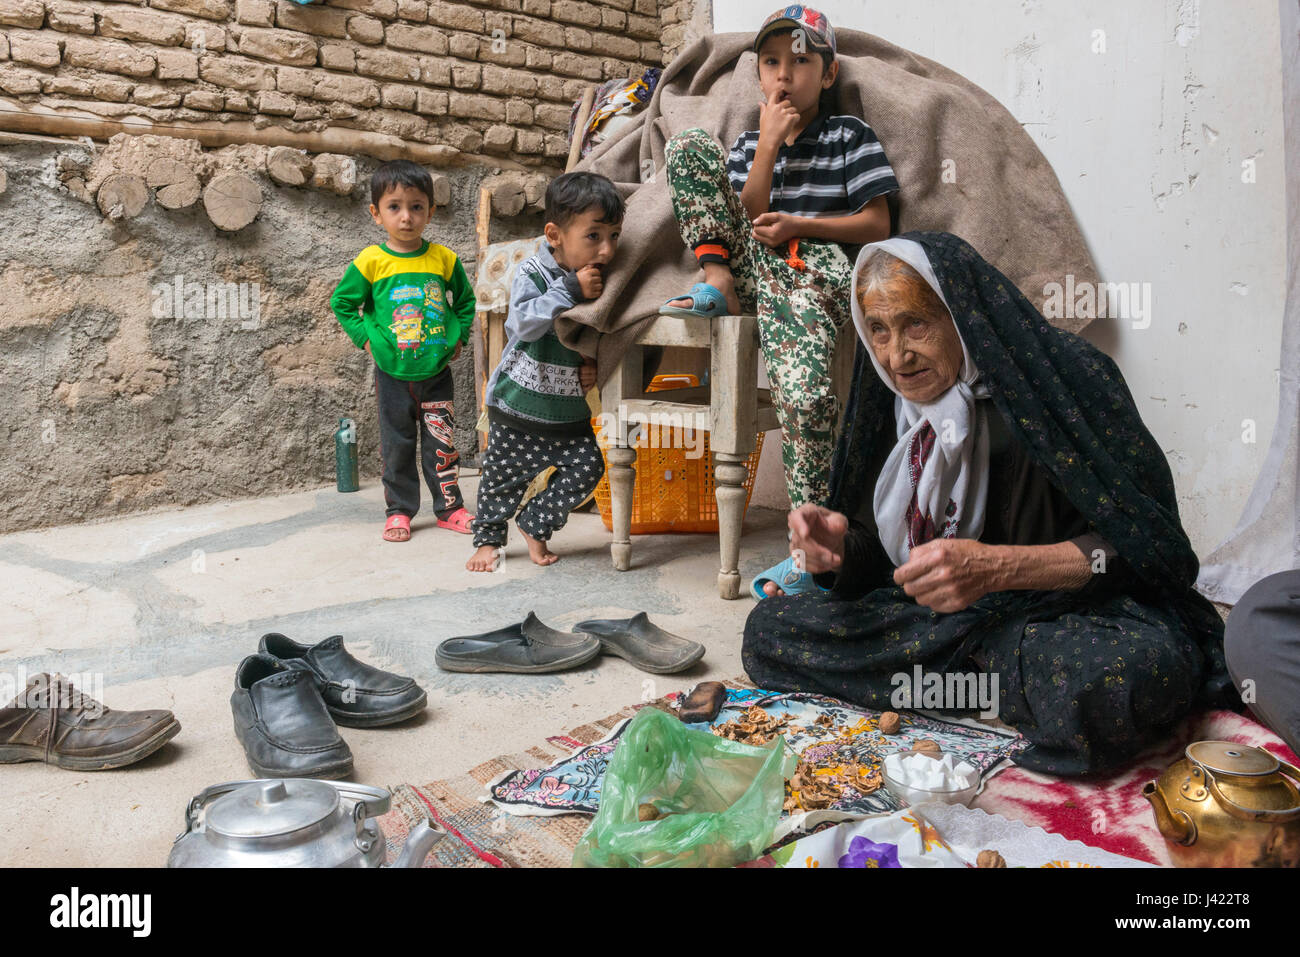 Old Lady And Grandsons Inside Her House Offering Homemade Delicacies To Visitors, Esfidan, A Traditional Rural Village, North Khorasan Province, IRAN  Stock Photo